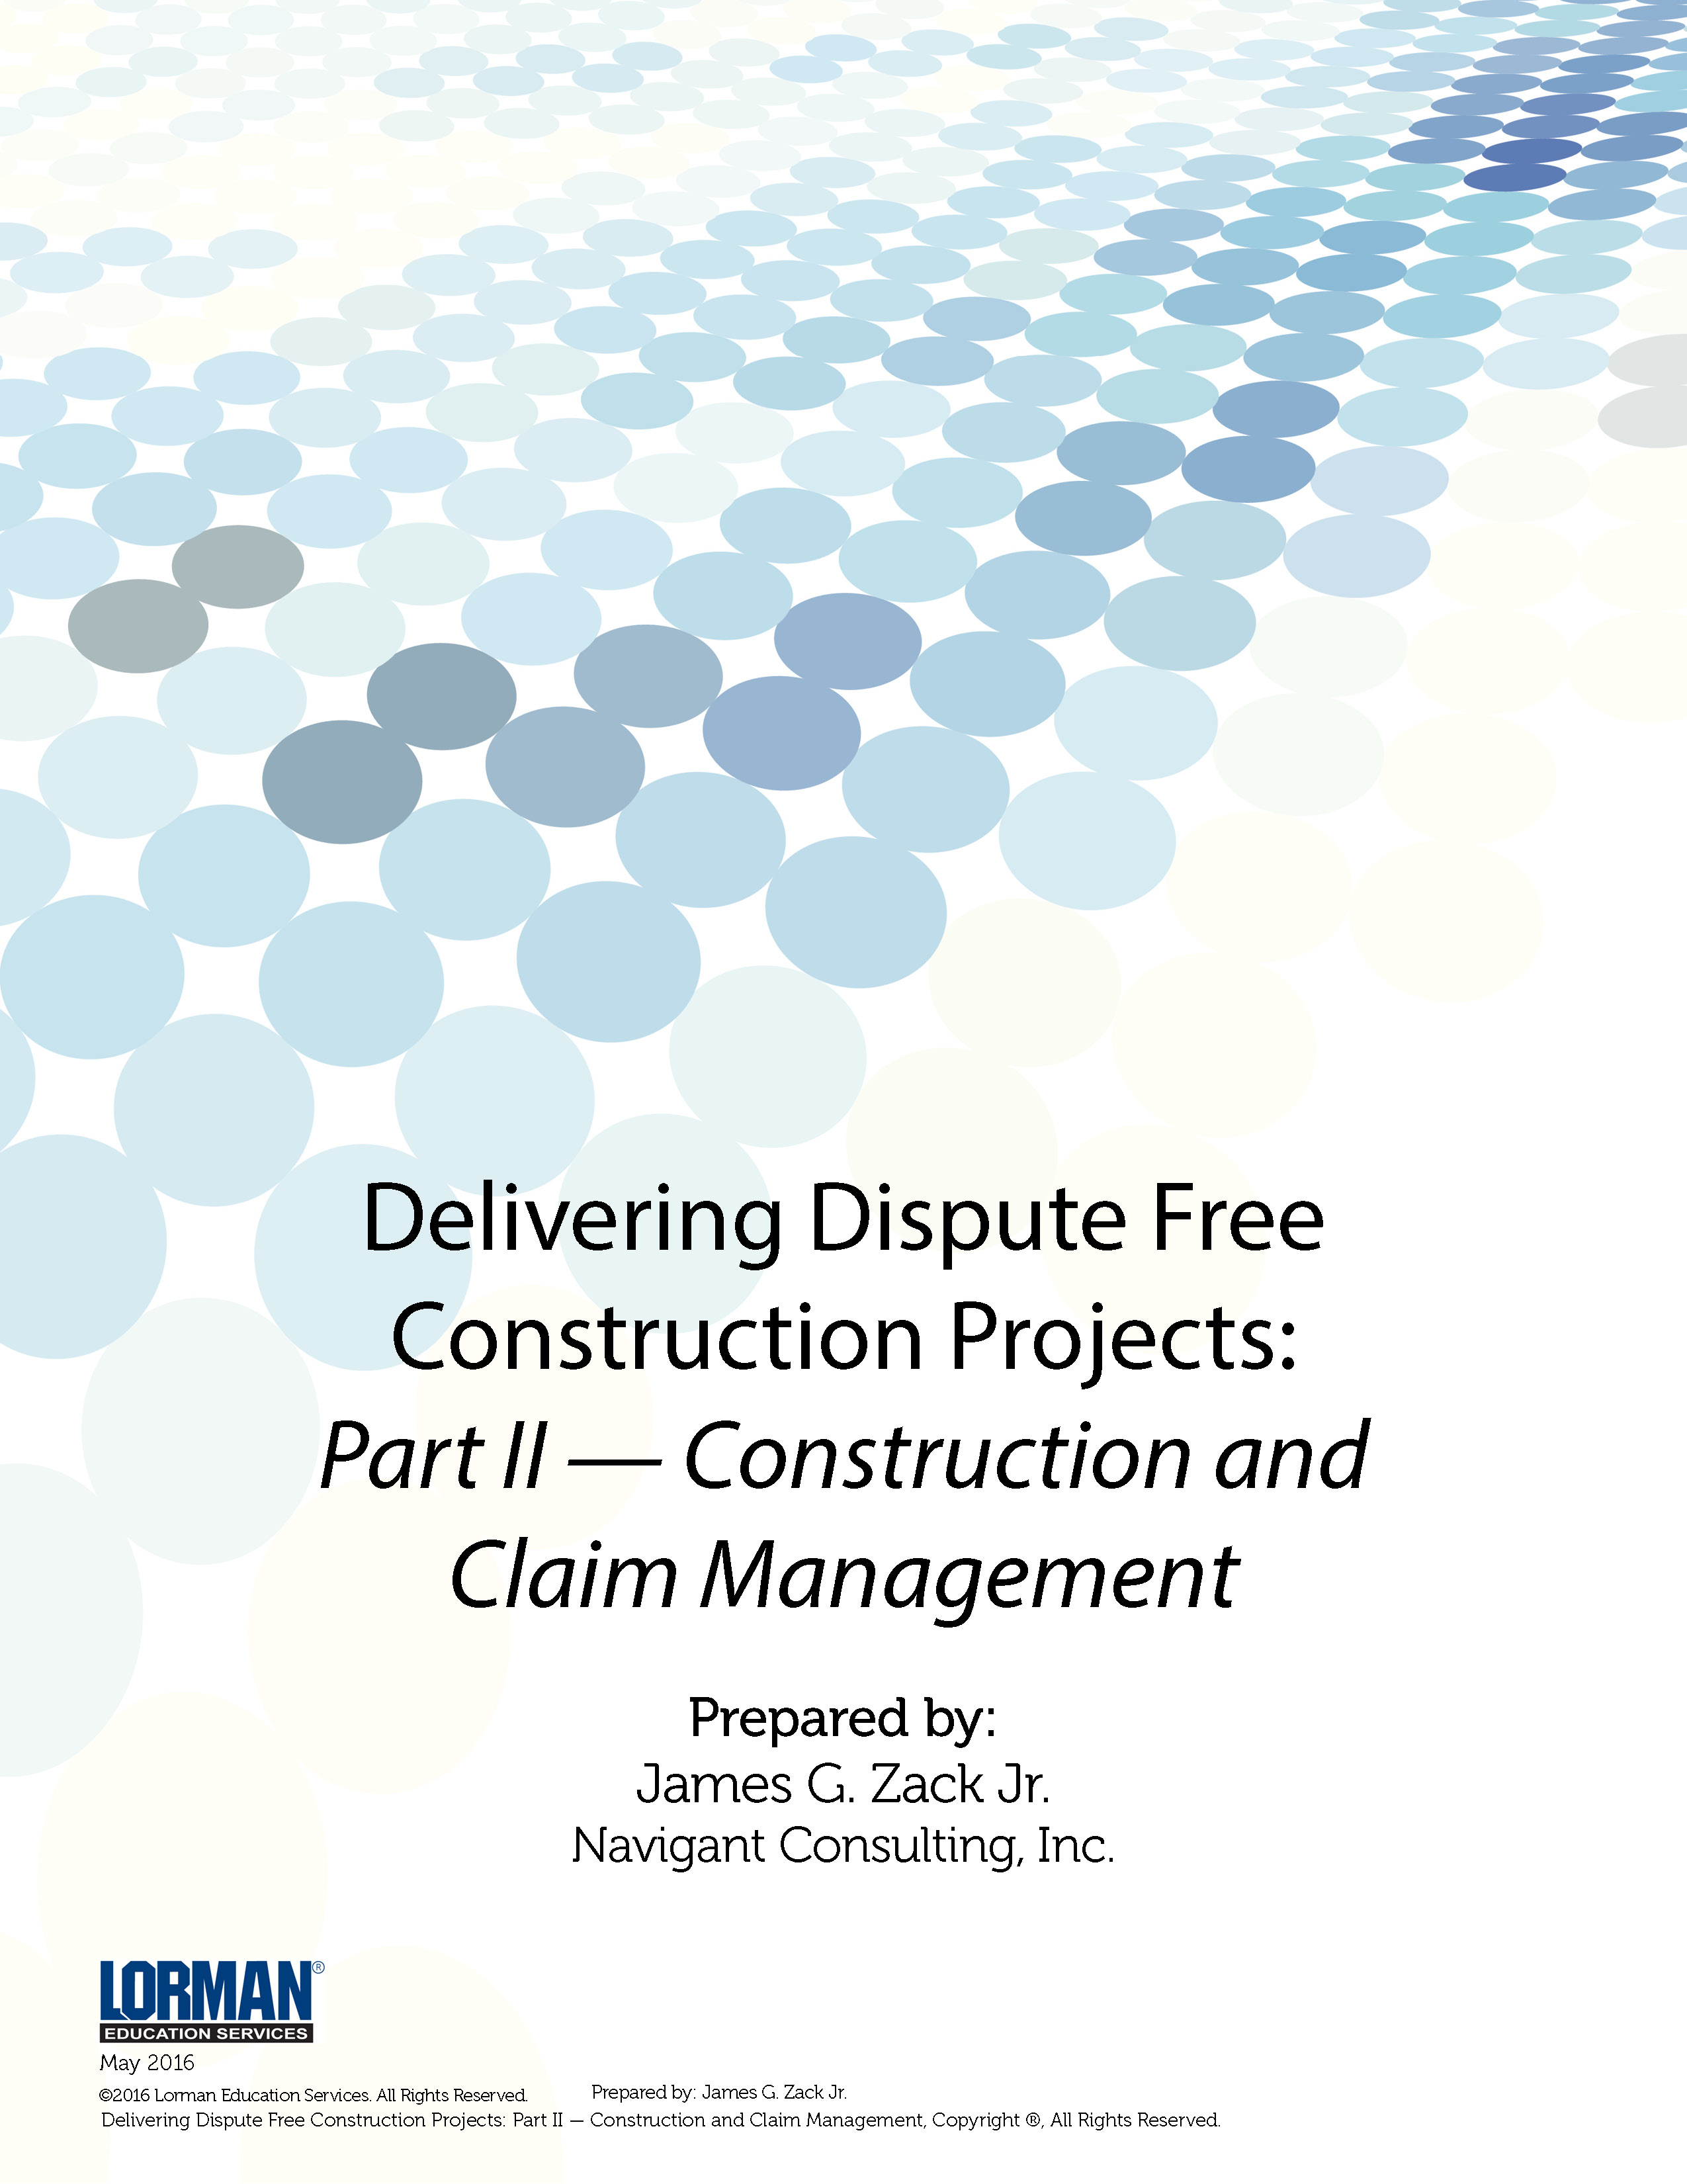 Delivering Dispute Free Construction Projects: Part II - Construction and Claim Management